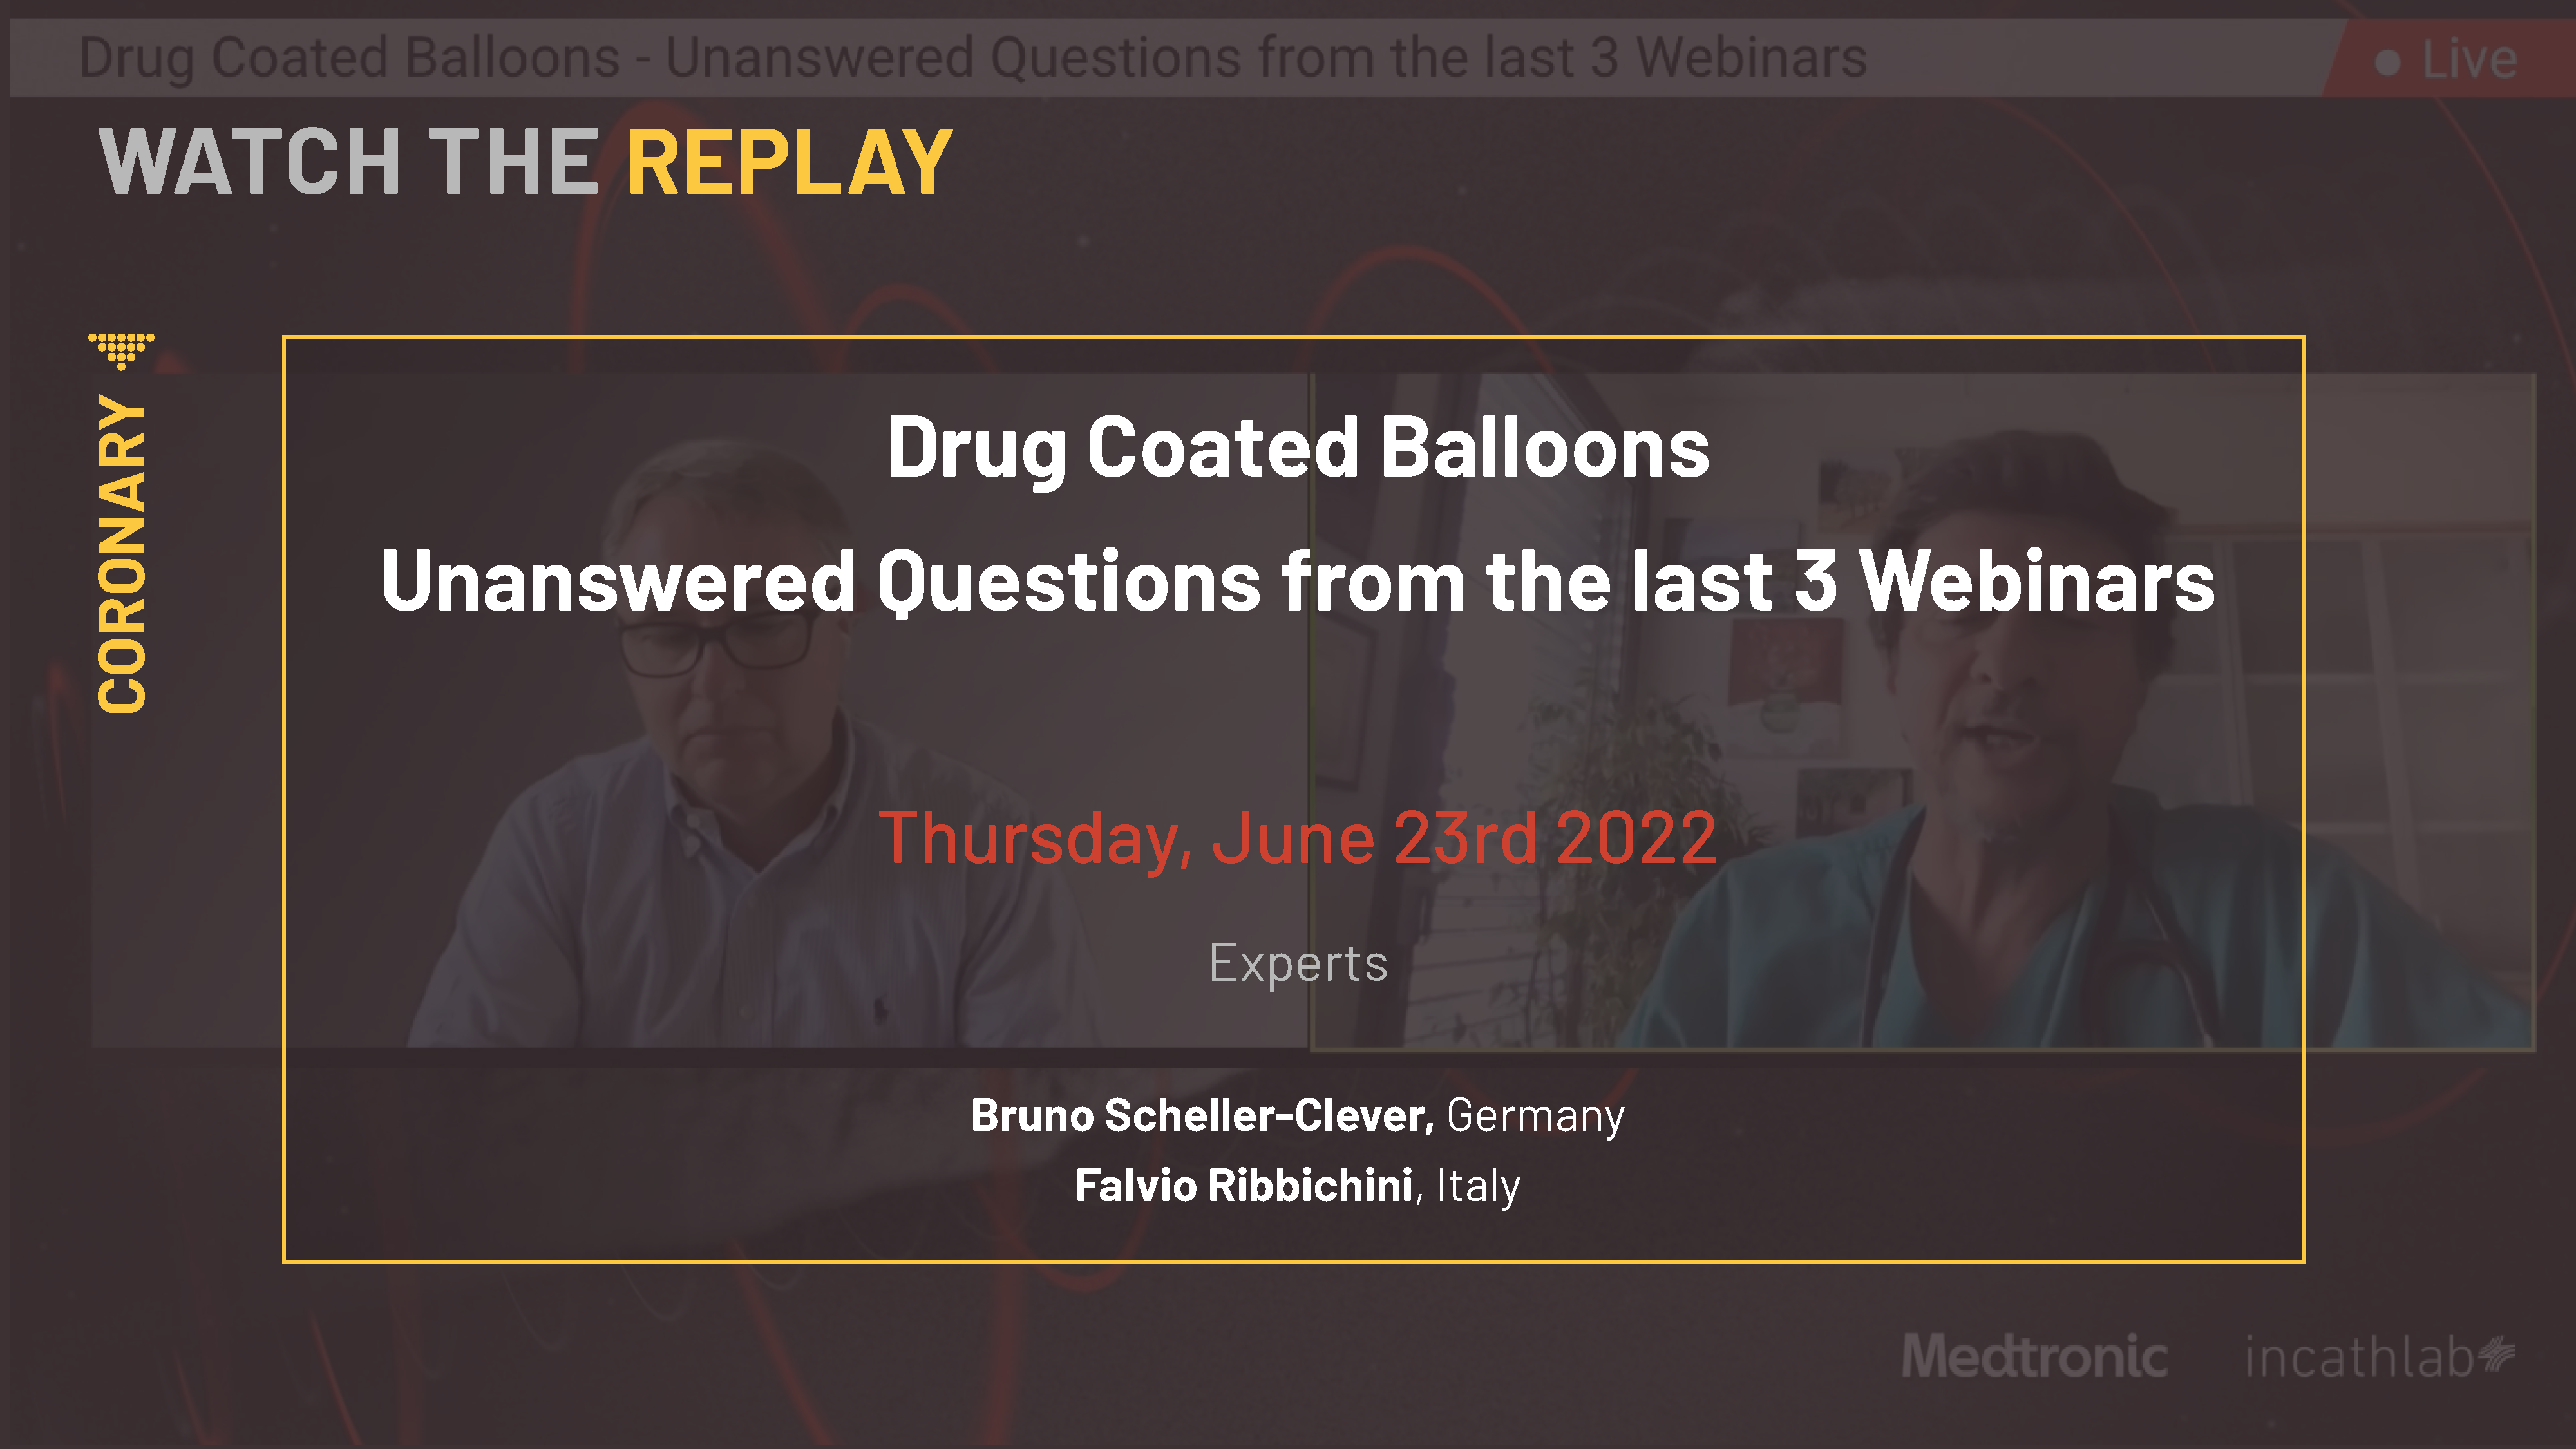 Drug Coated Balloons - Unanswered Questions from the last 3 Webinars